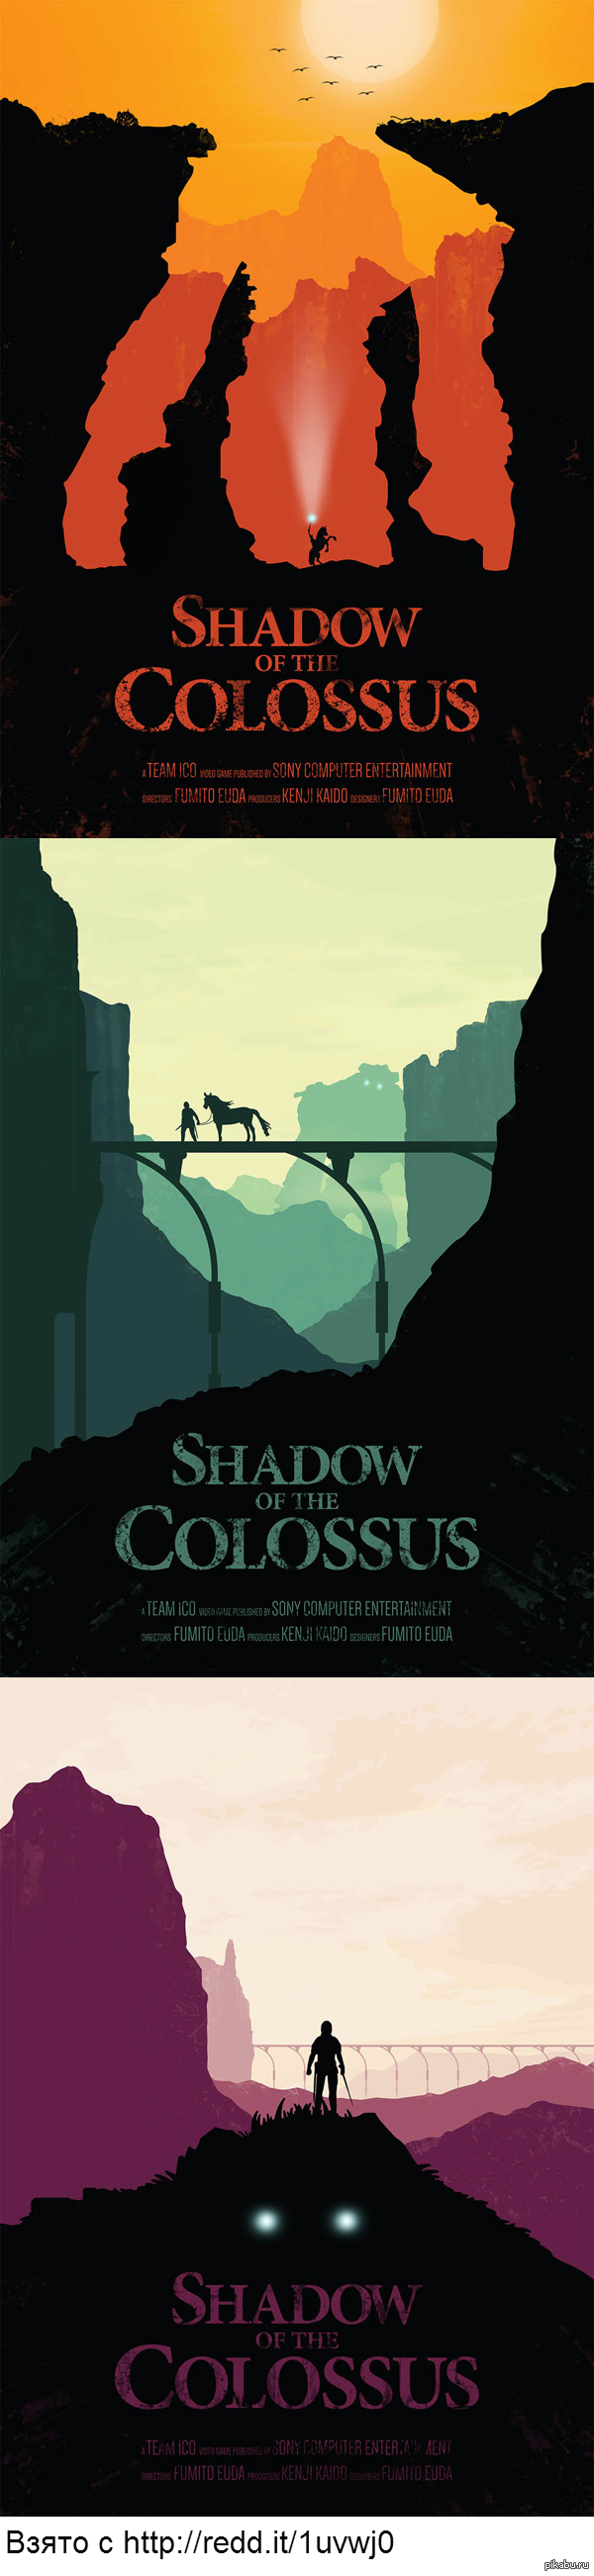    &quot;Shadow of the Colossus&quot;. - 